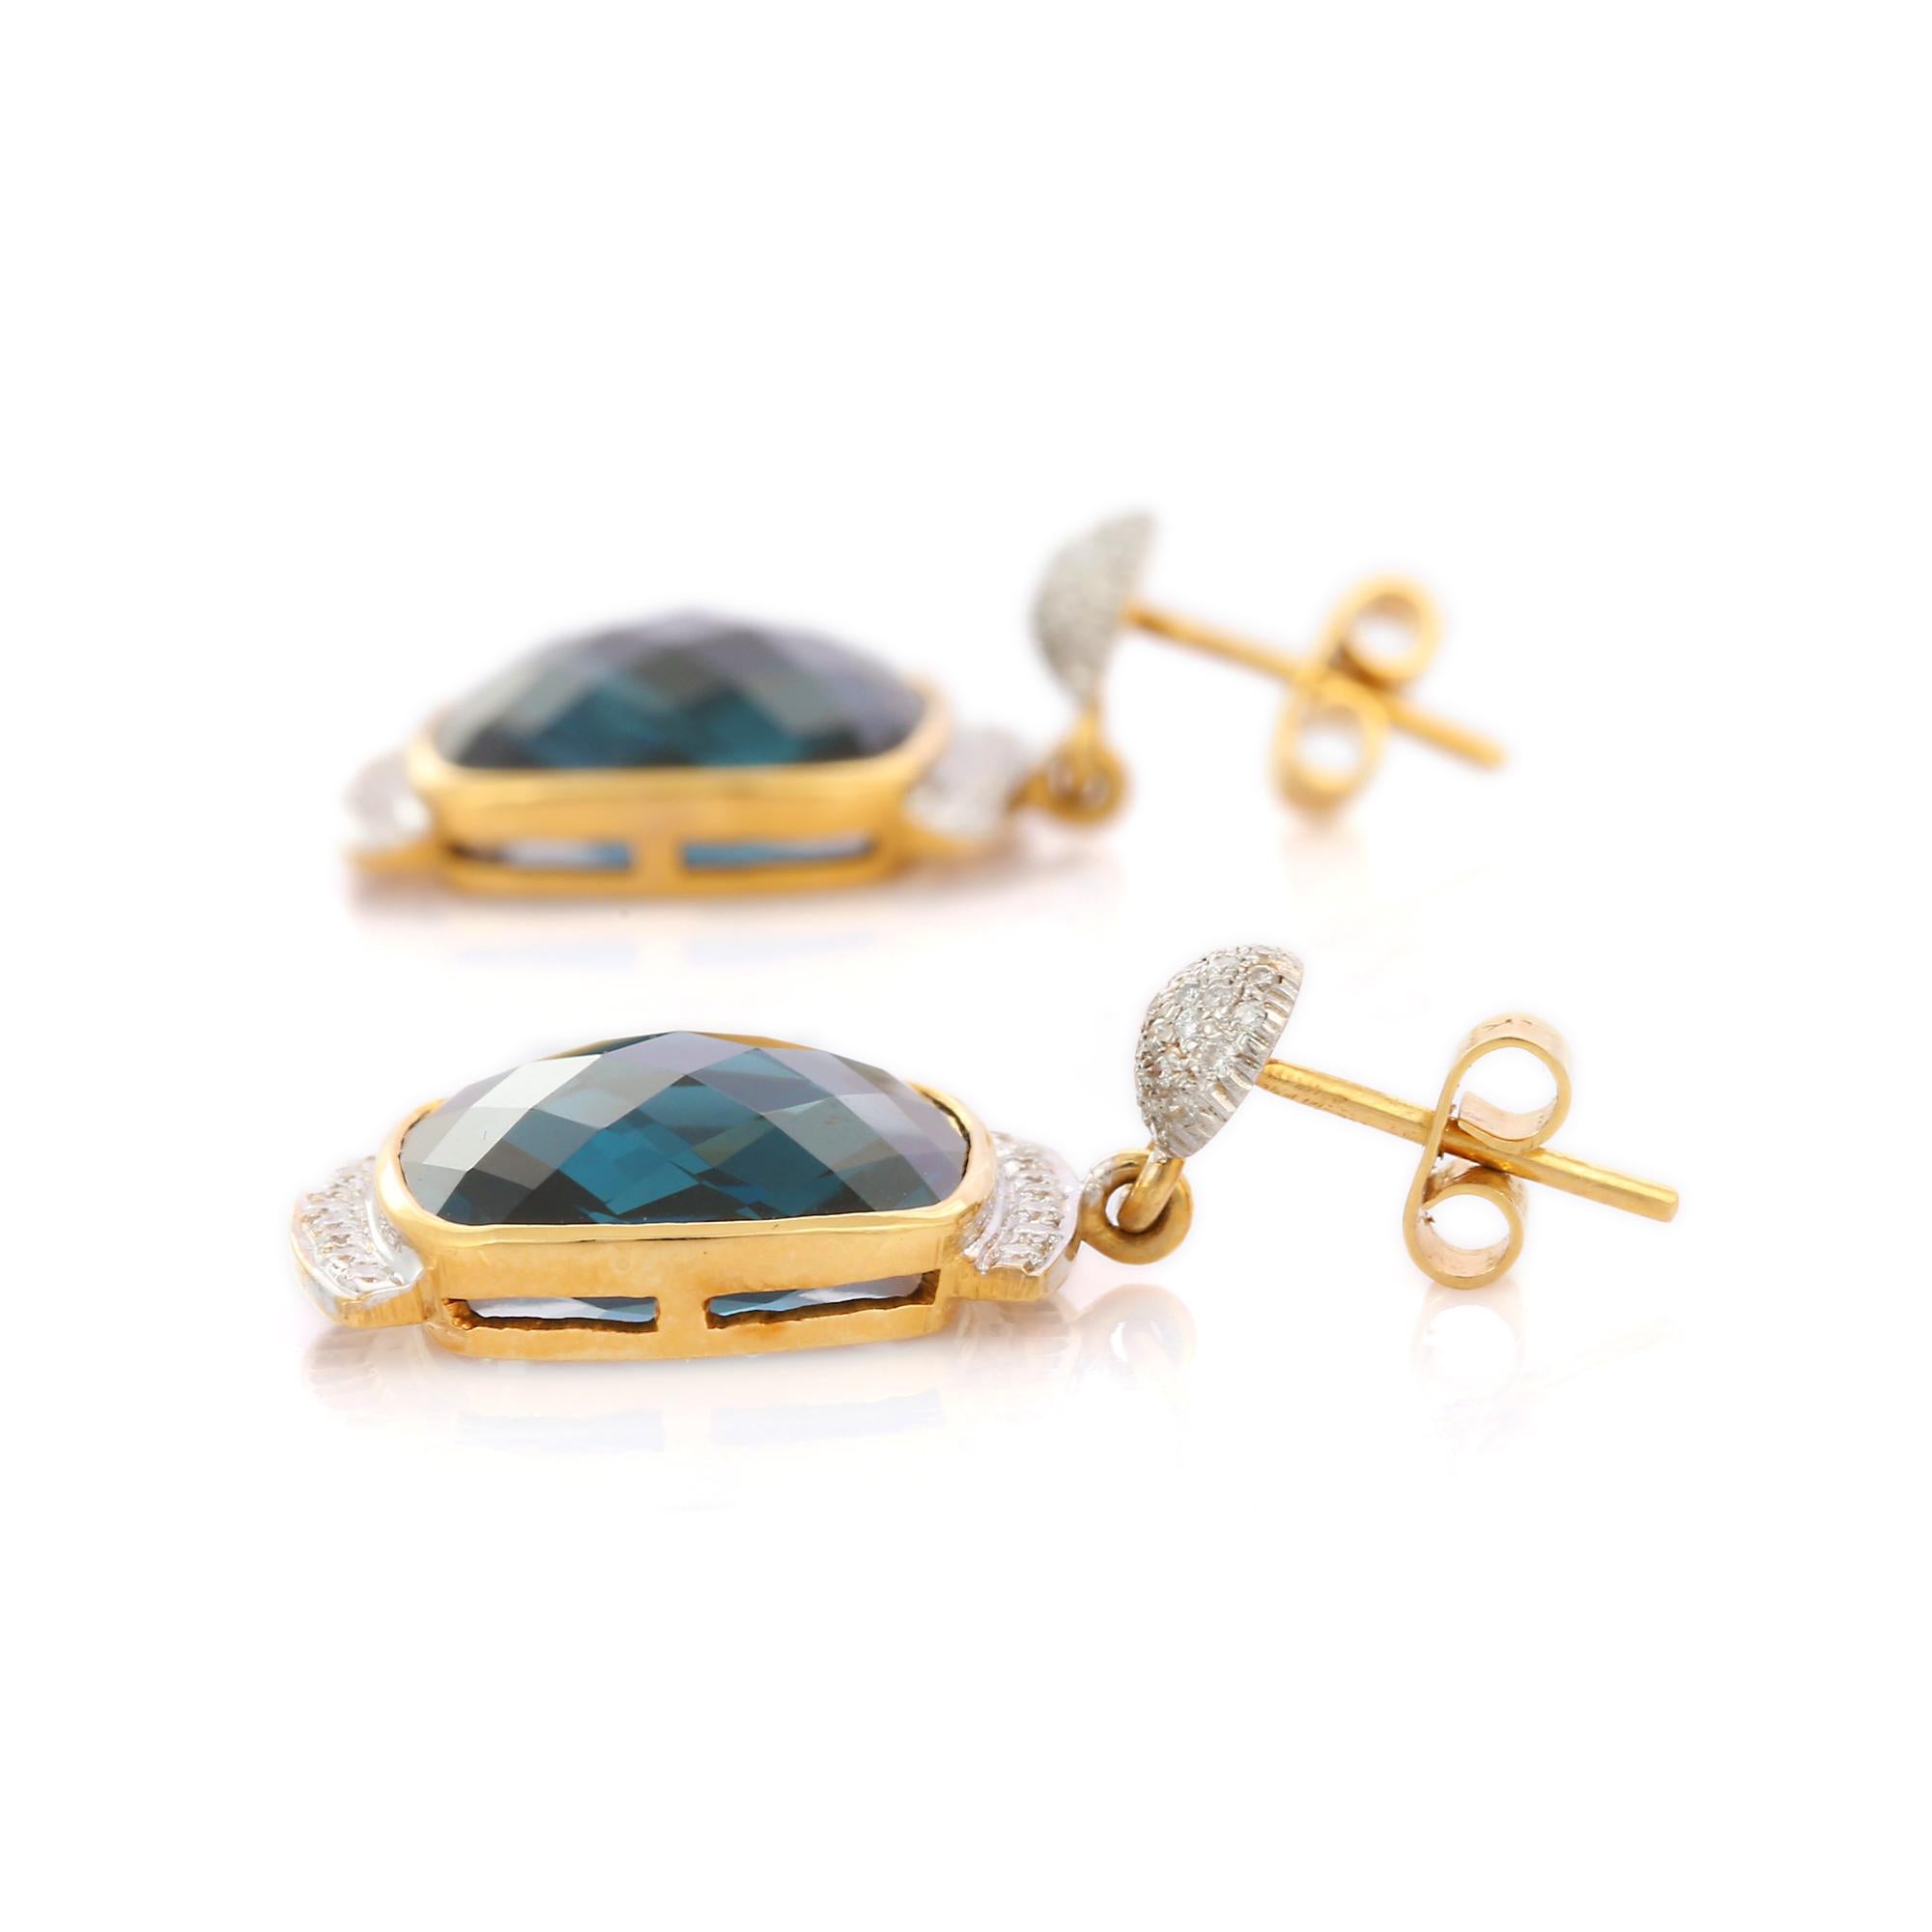 Cushion Cut 22.8 Ct Dark Blue Topaz Dangle Earrings with Diamonds Set in 14K Yellow Gold For Sale